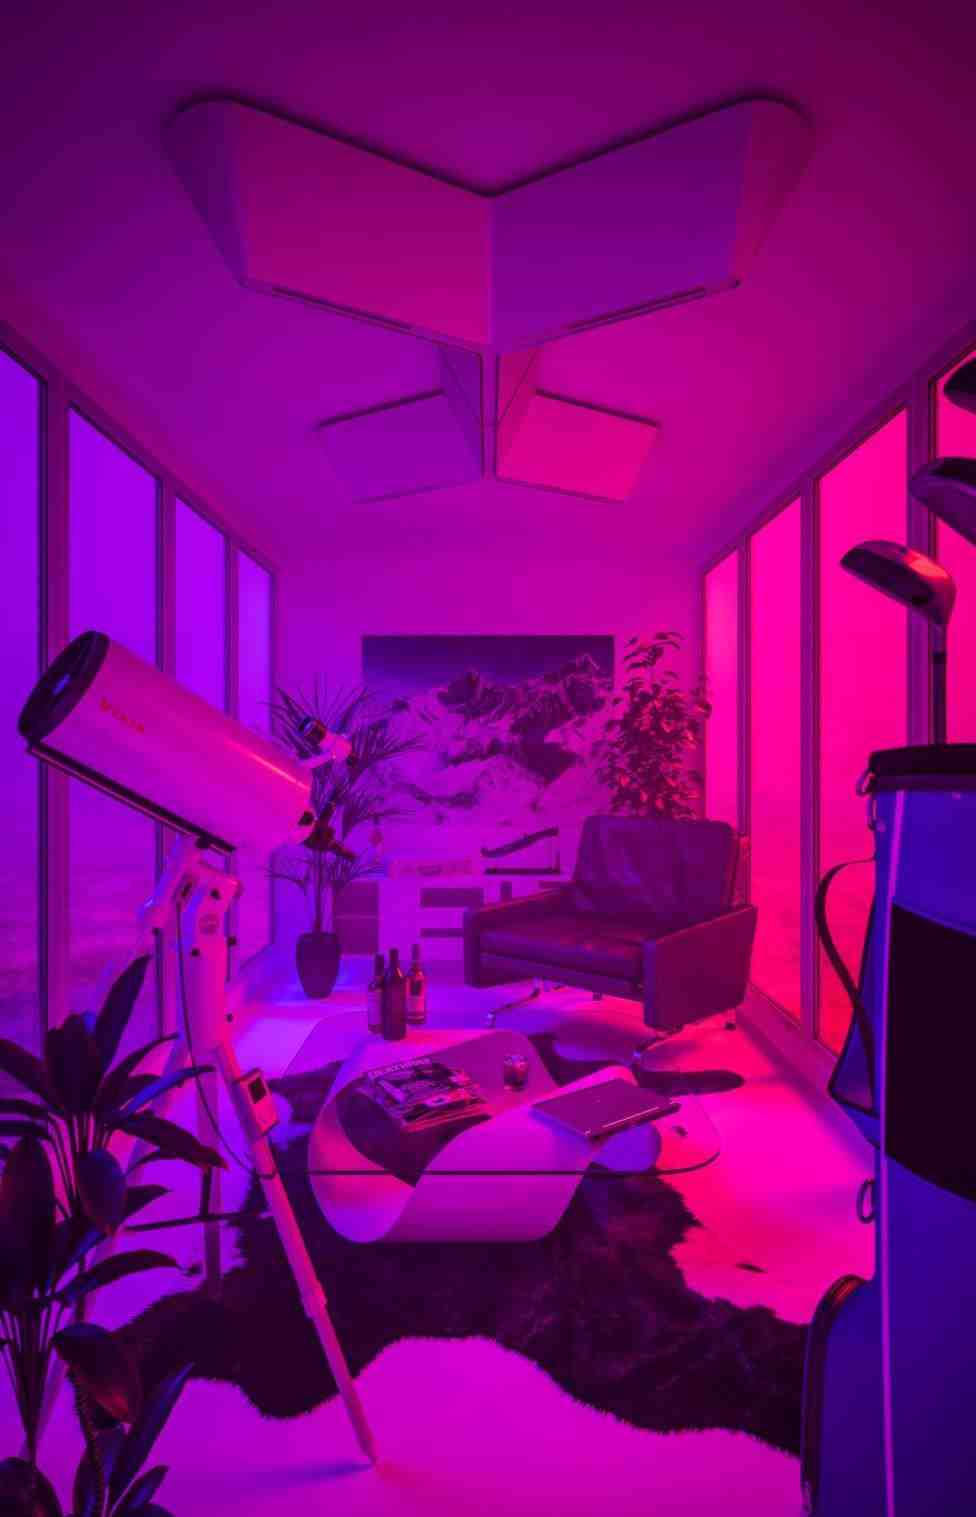 Enjoy the warm neon glow of retro chic with this cozy purple aesthetic room. Wallpaper